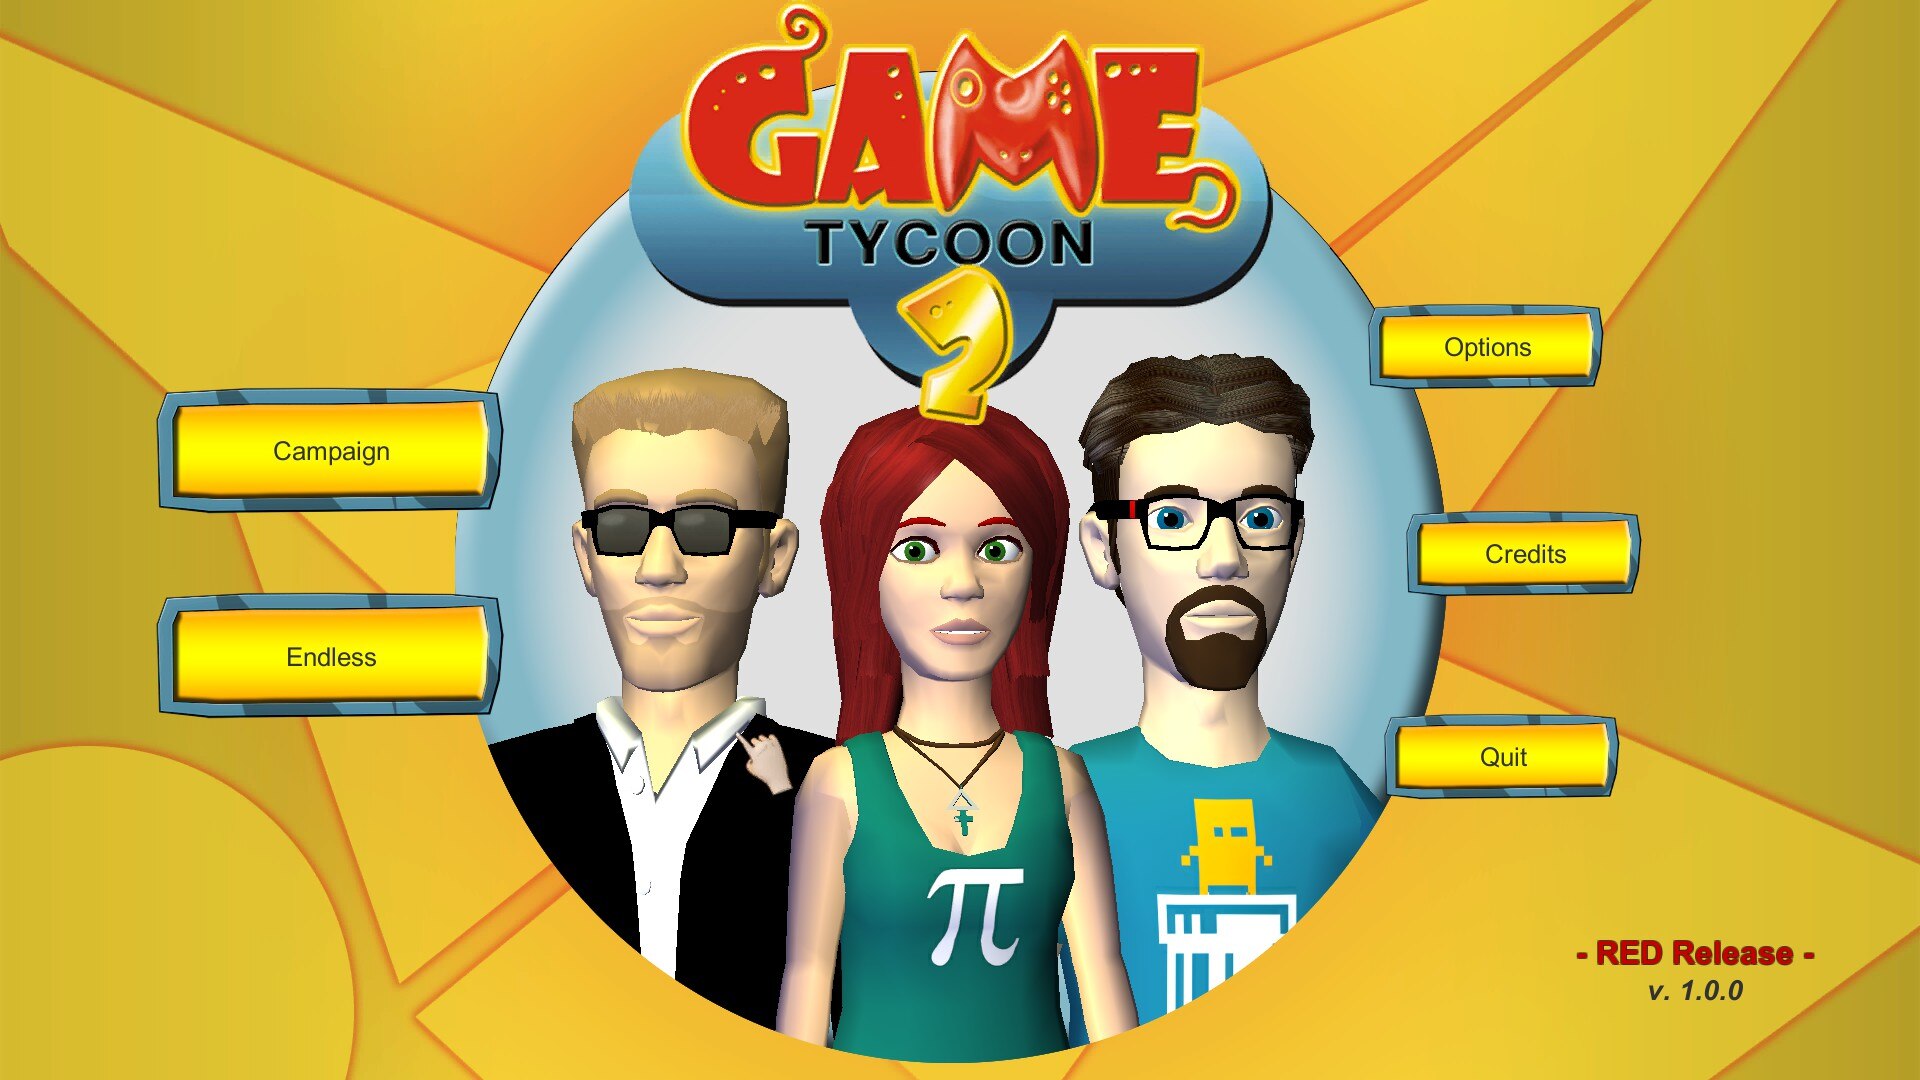 Pc tycoon 2 1.2. Tycoon игры. Tycoon 2. Game Dev Tycoon 2. Tycoon games Android.